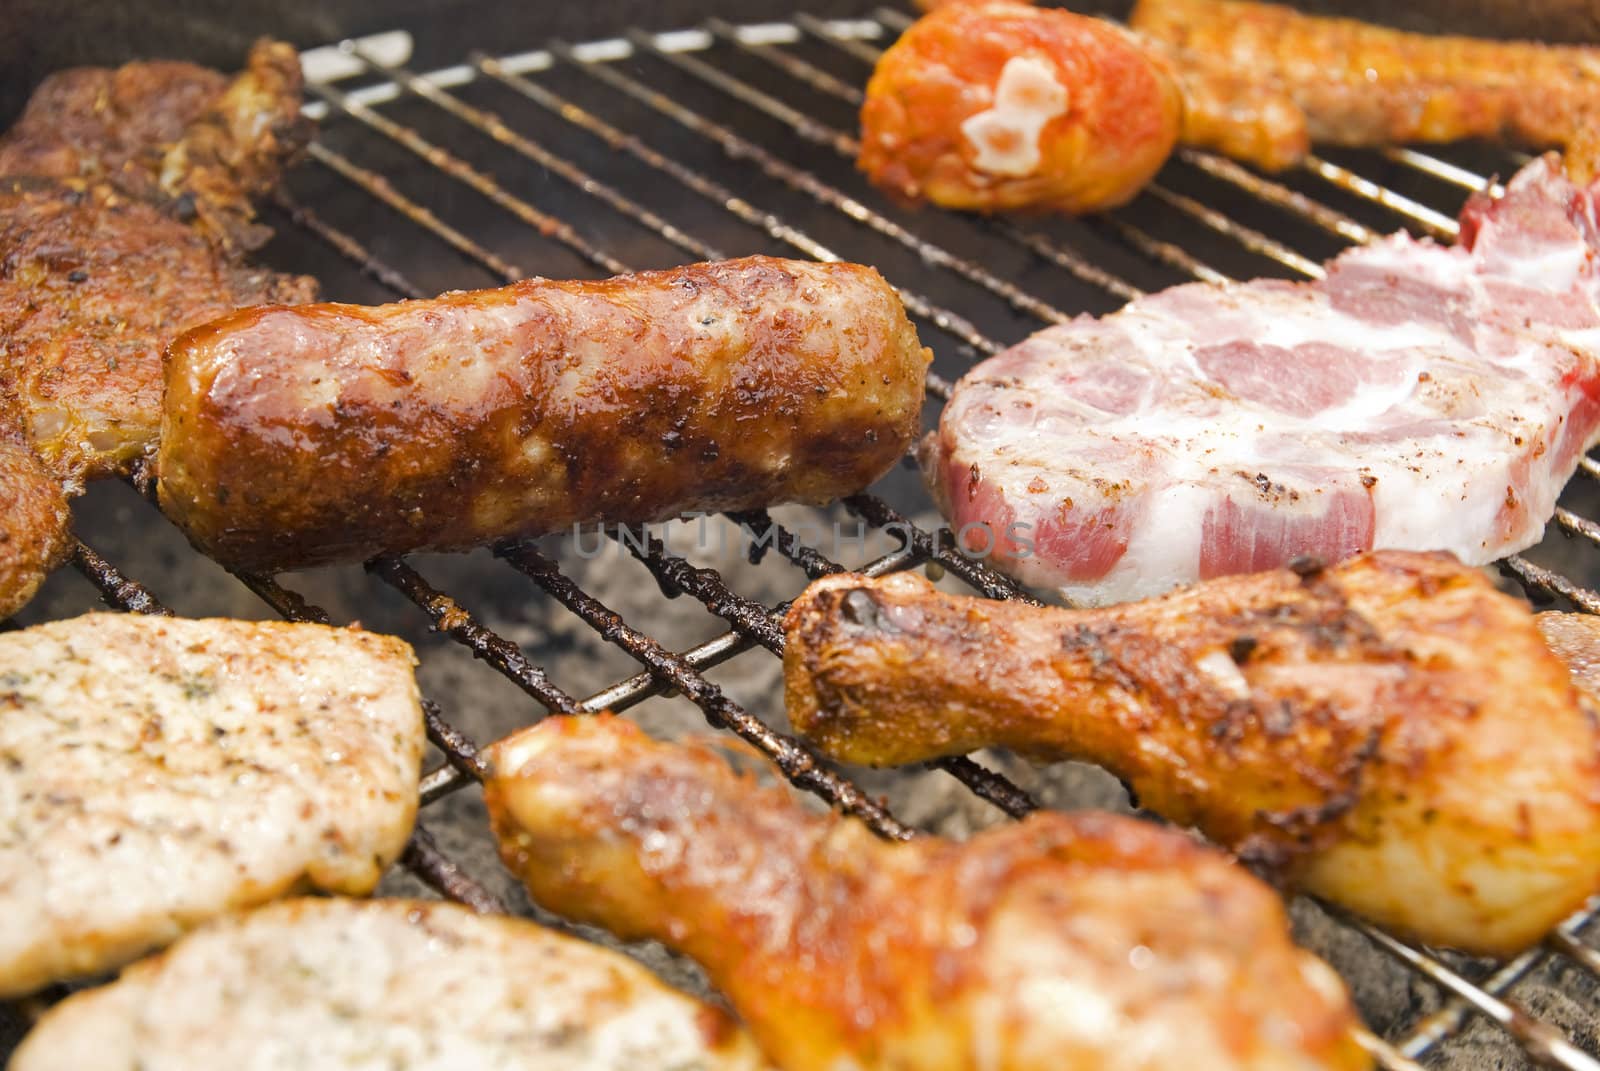 Sausages, beef and other meat on a barbecue by Gertje